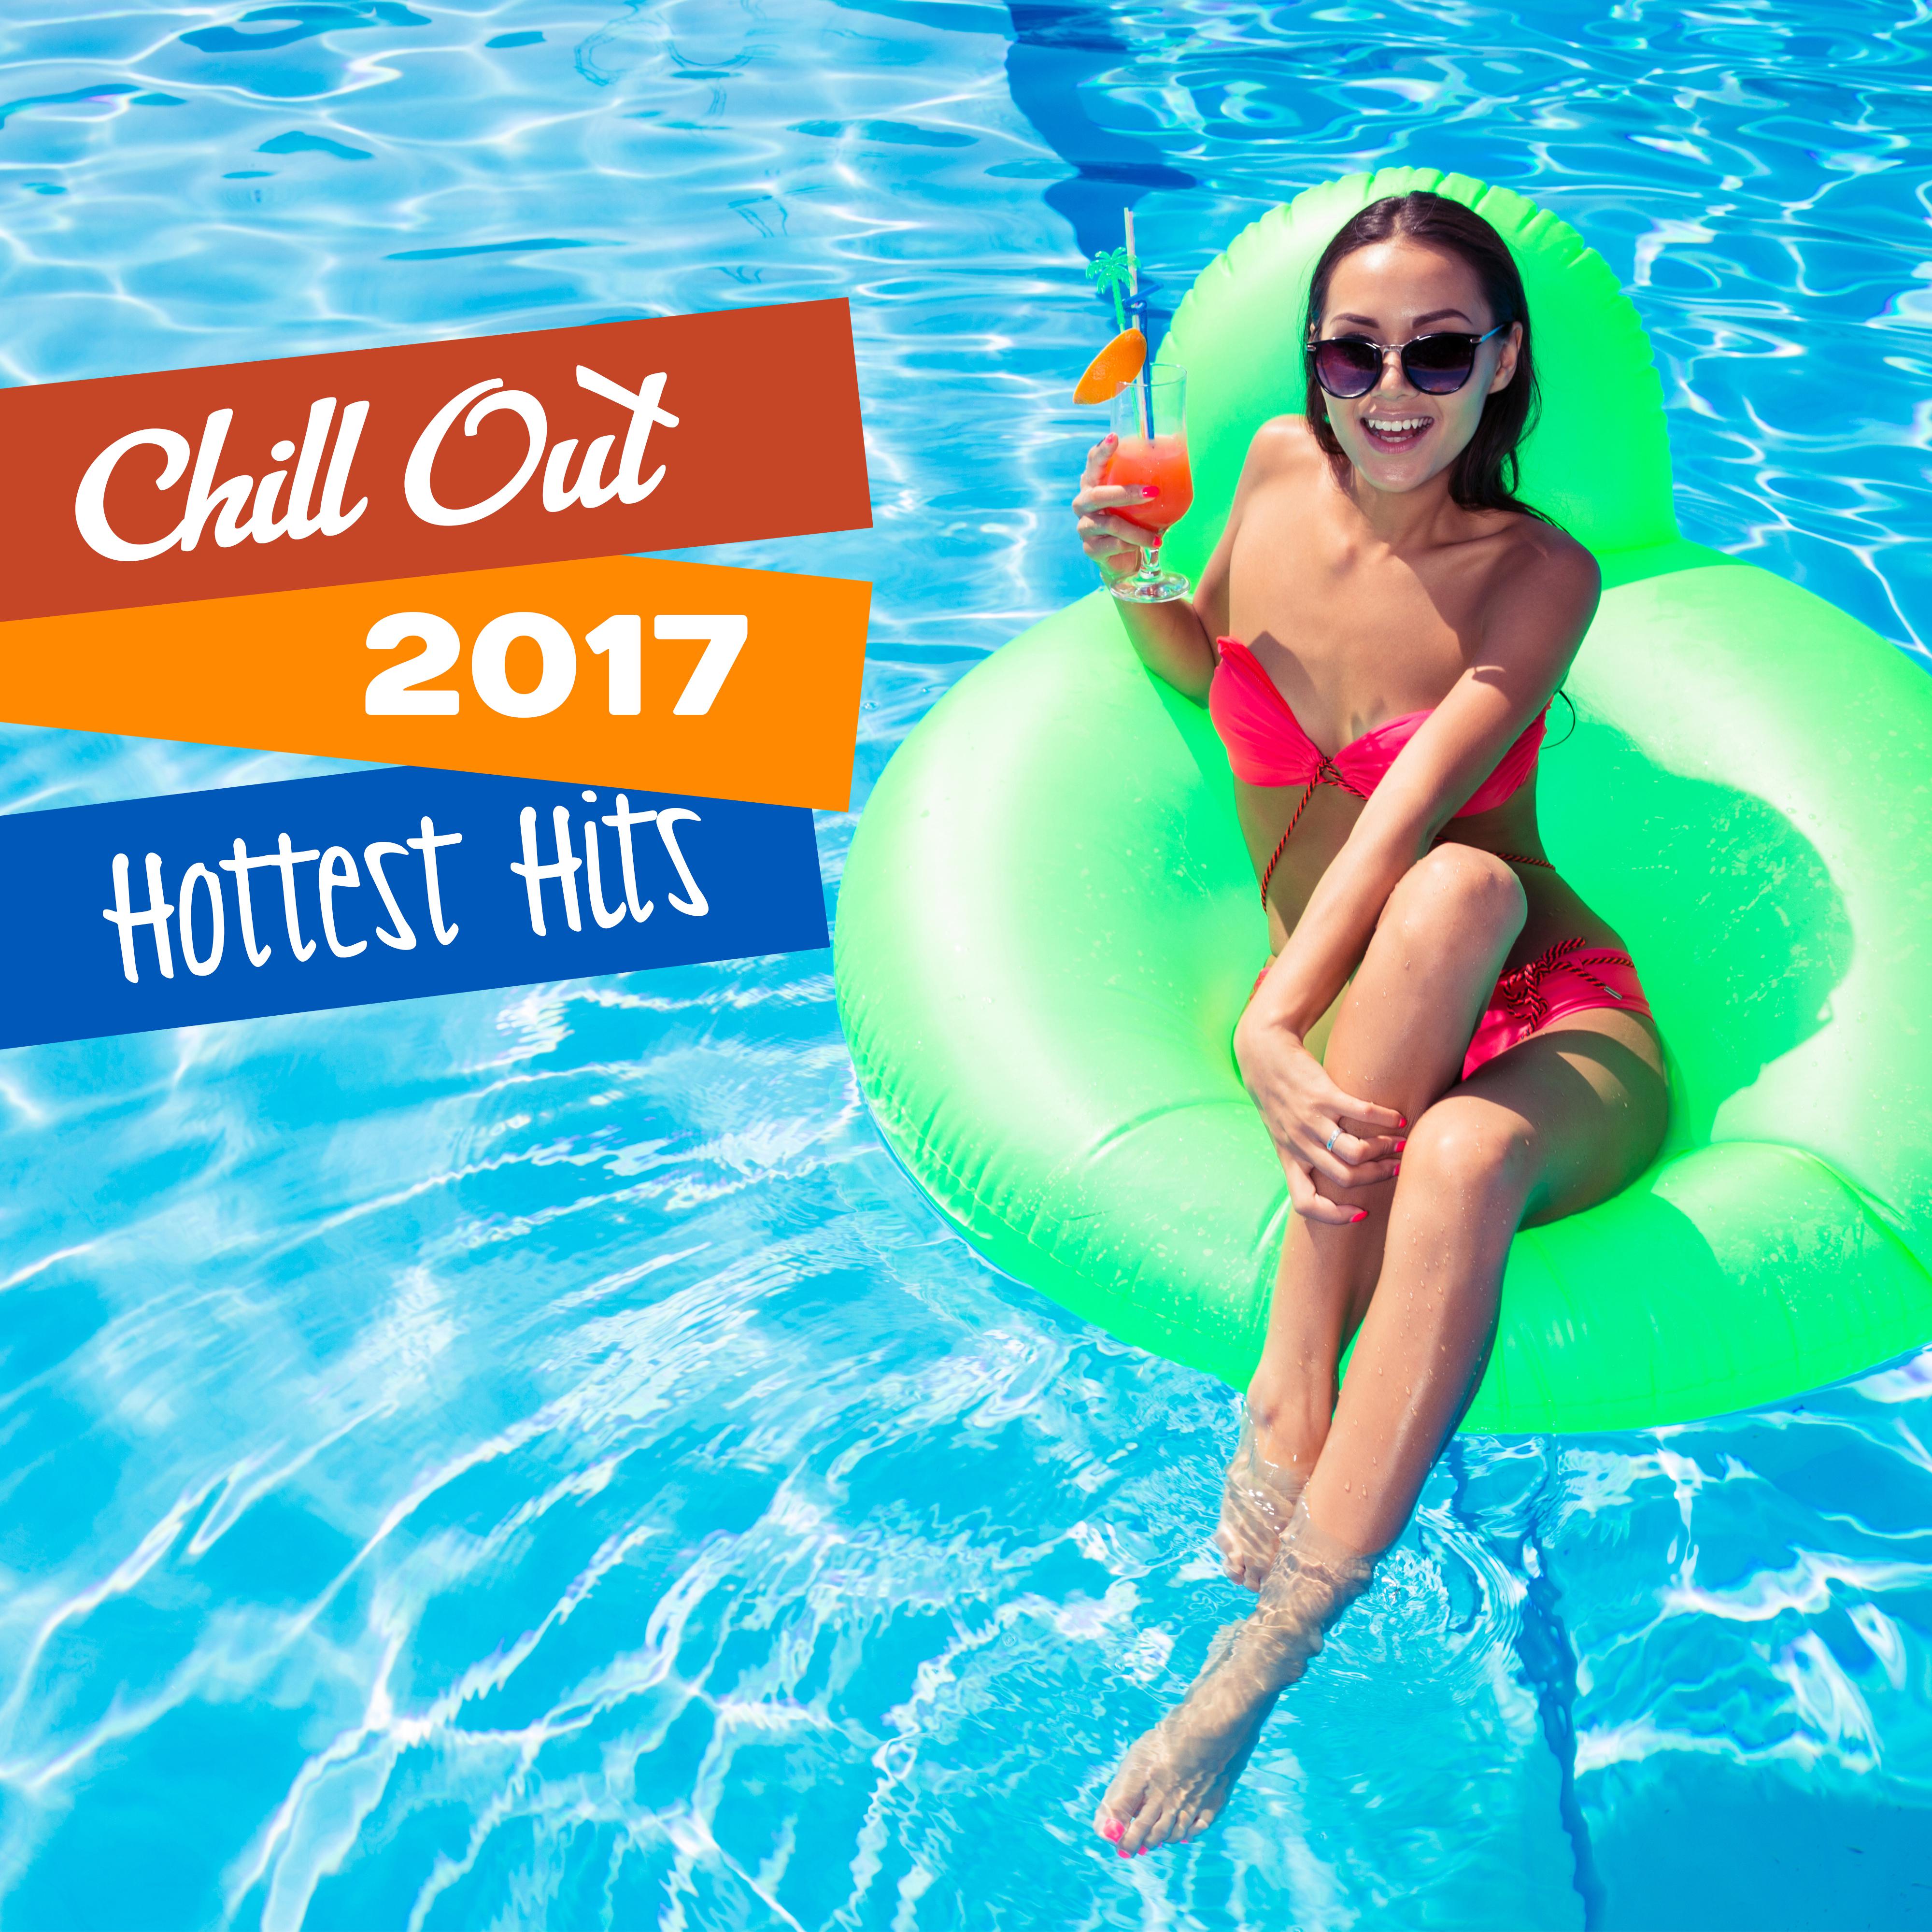 Chill Out 2017 Hottest Hits -  Summer Relax, Chillout Party, Chill Out 2017, Lounge, **** Chill